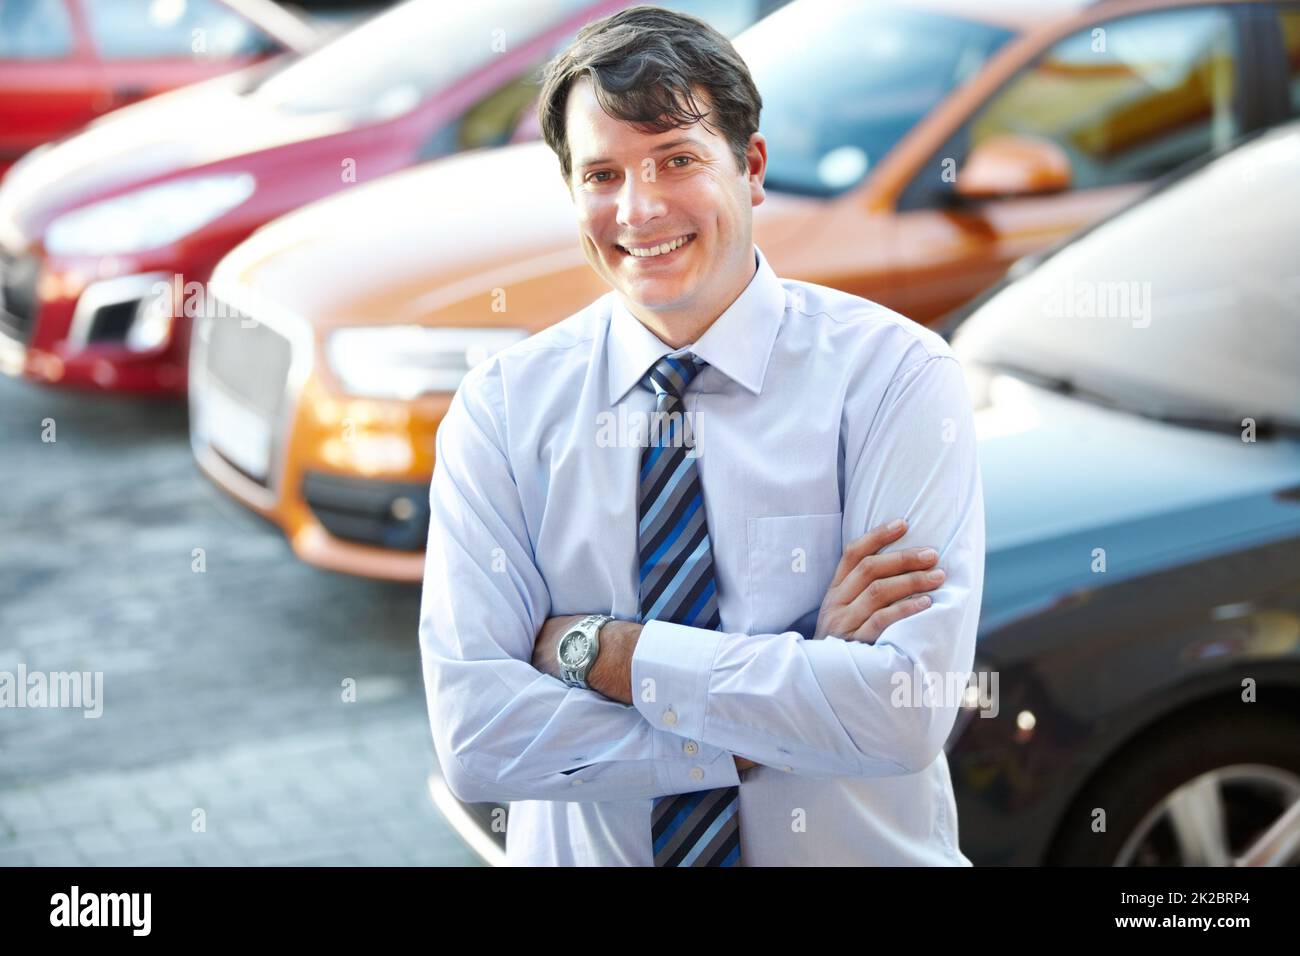 He can give you a great car deal. A man smiling confidently while standing in the lot of his dealership. Stock Photo